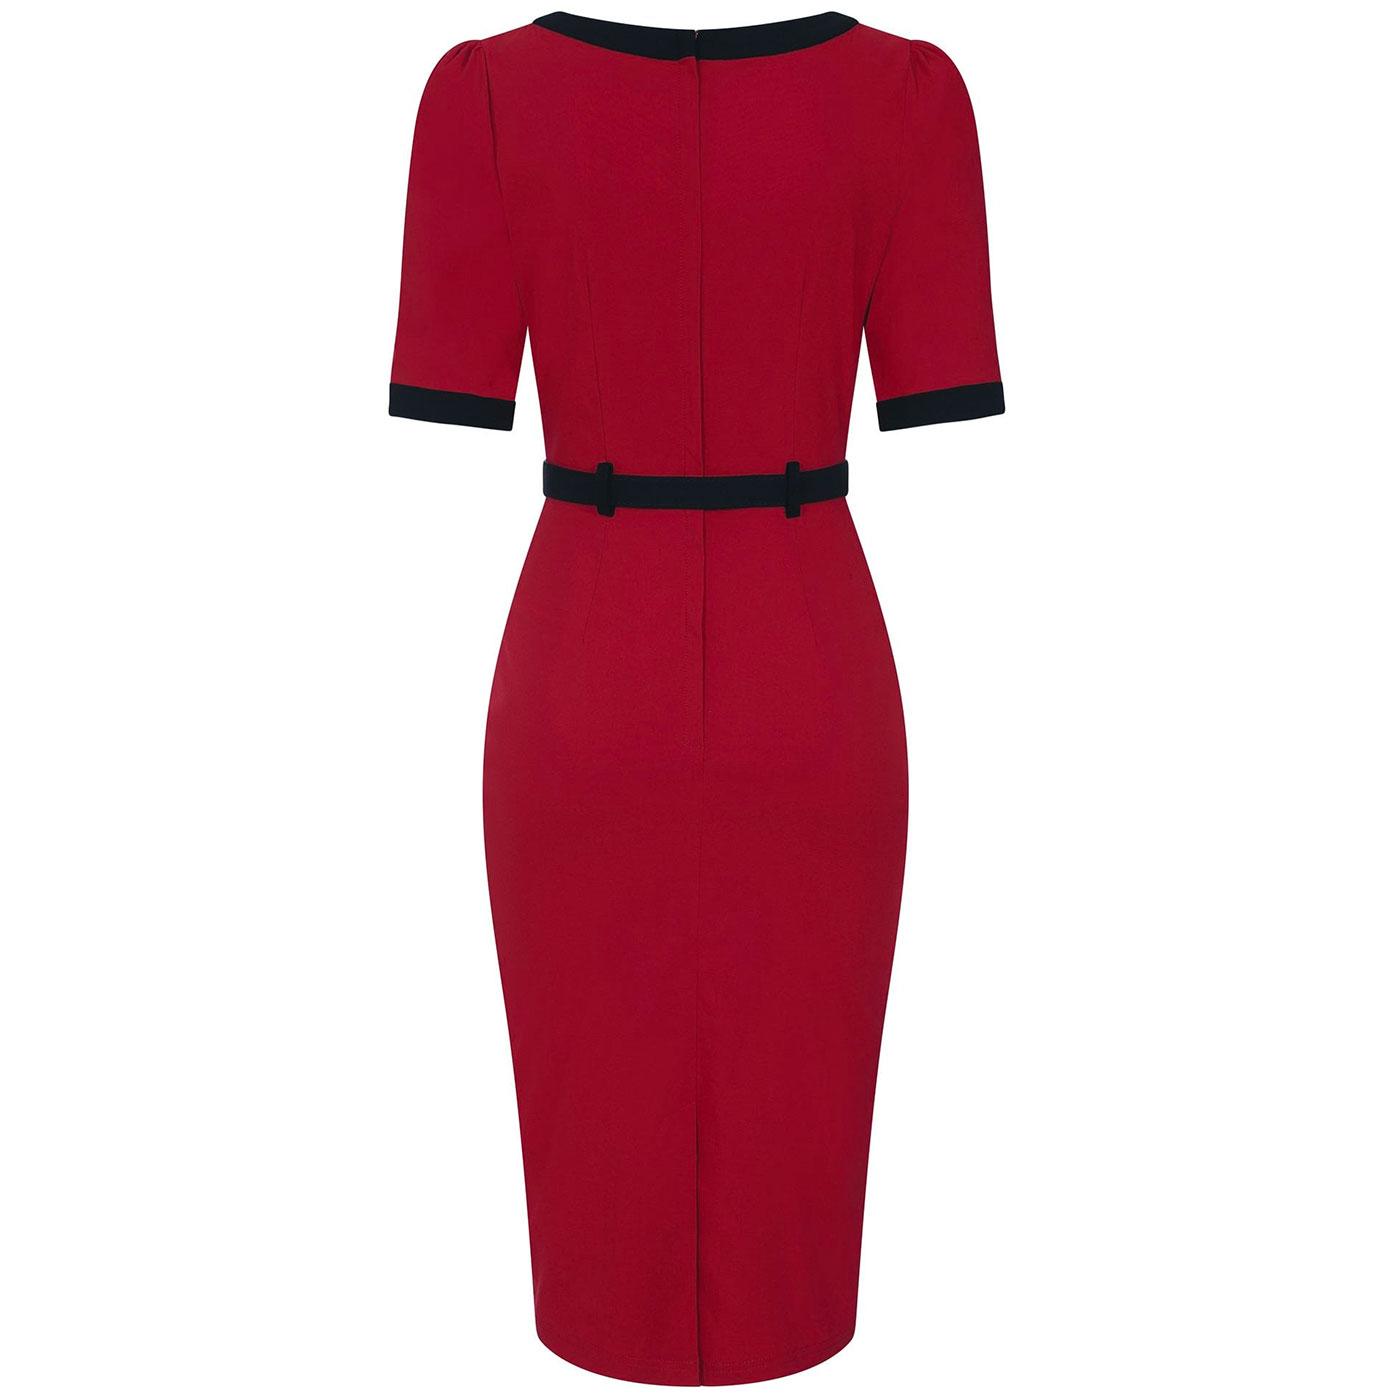 COLLECTIF Sadie Retro 50s Bow Front Pencil Dress in Red